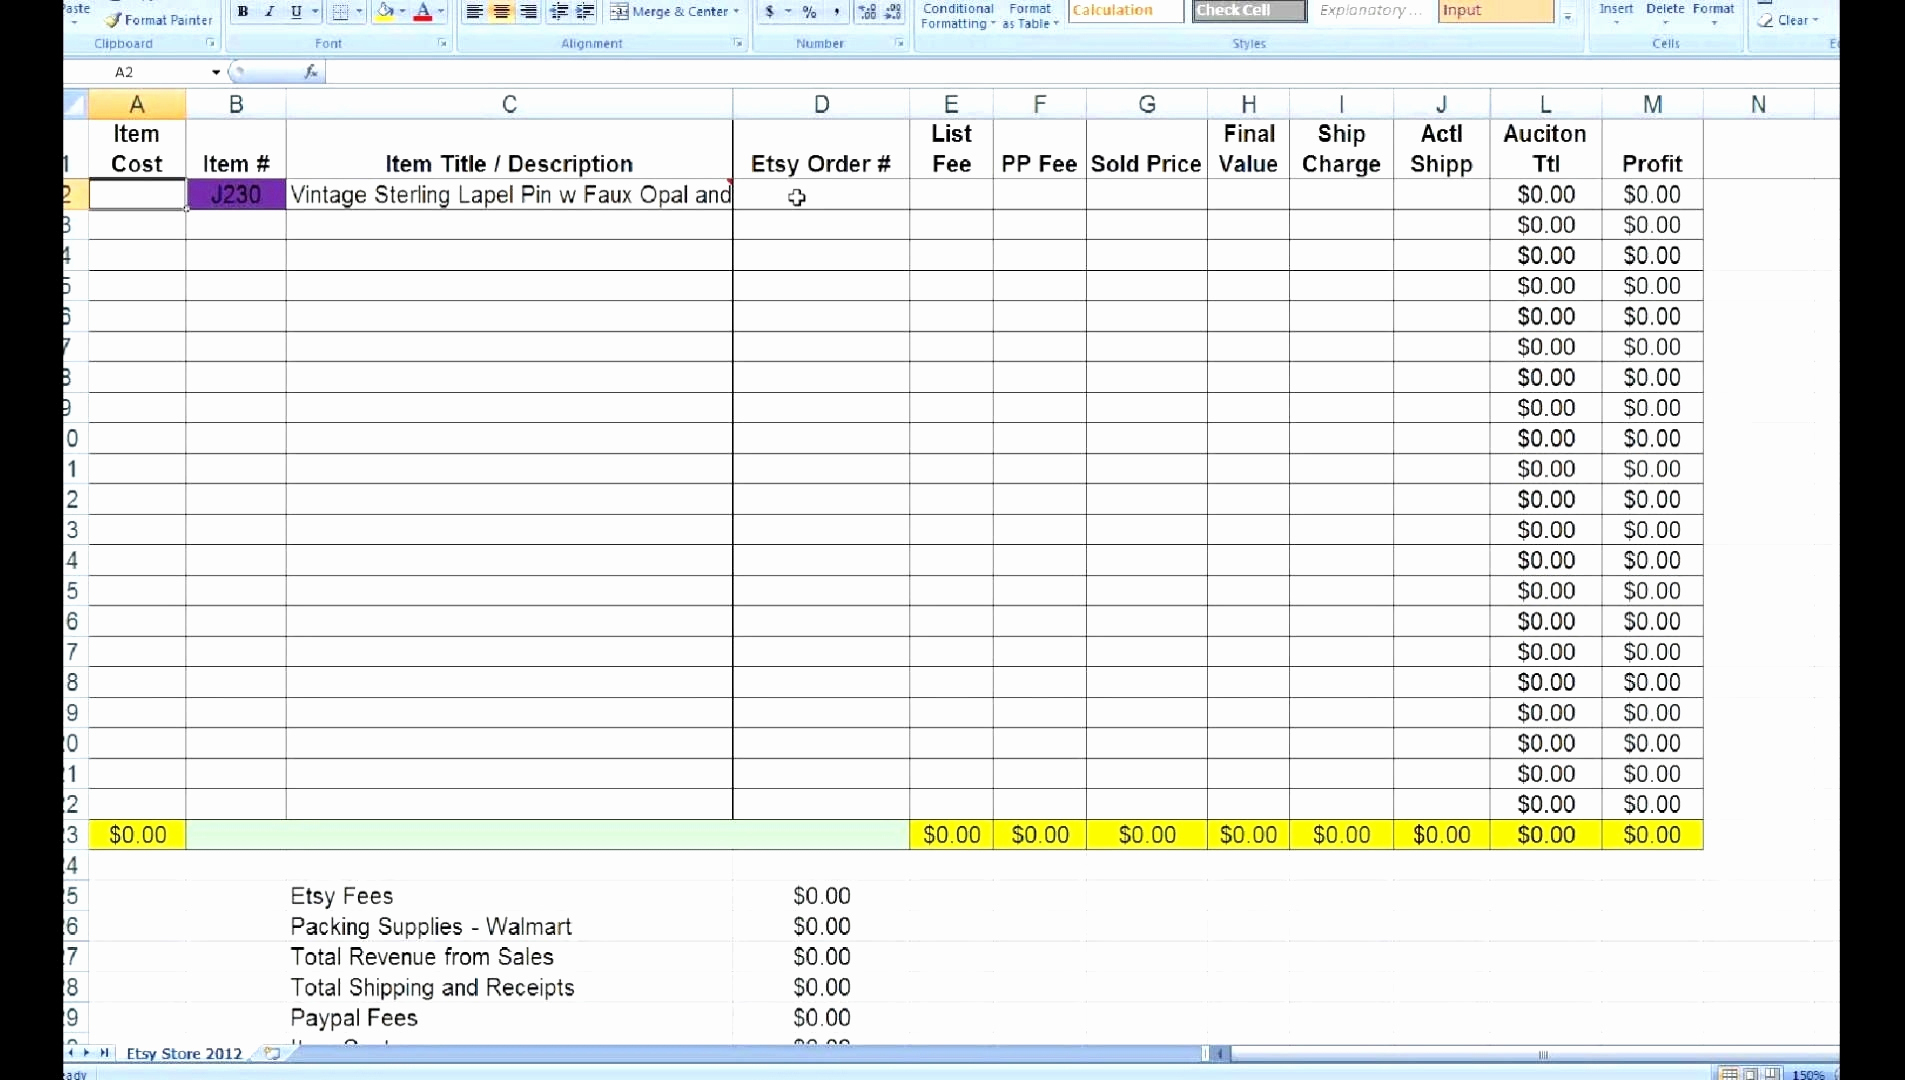 Biggest Loser Spreadsheet Intended For Example Of Biggest Loser Weight Loss Calculator Spreadsheet